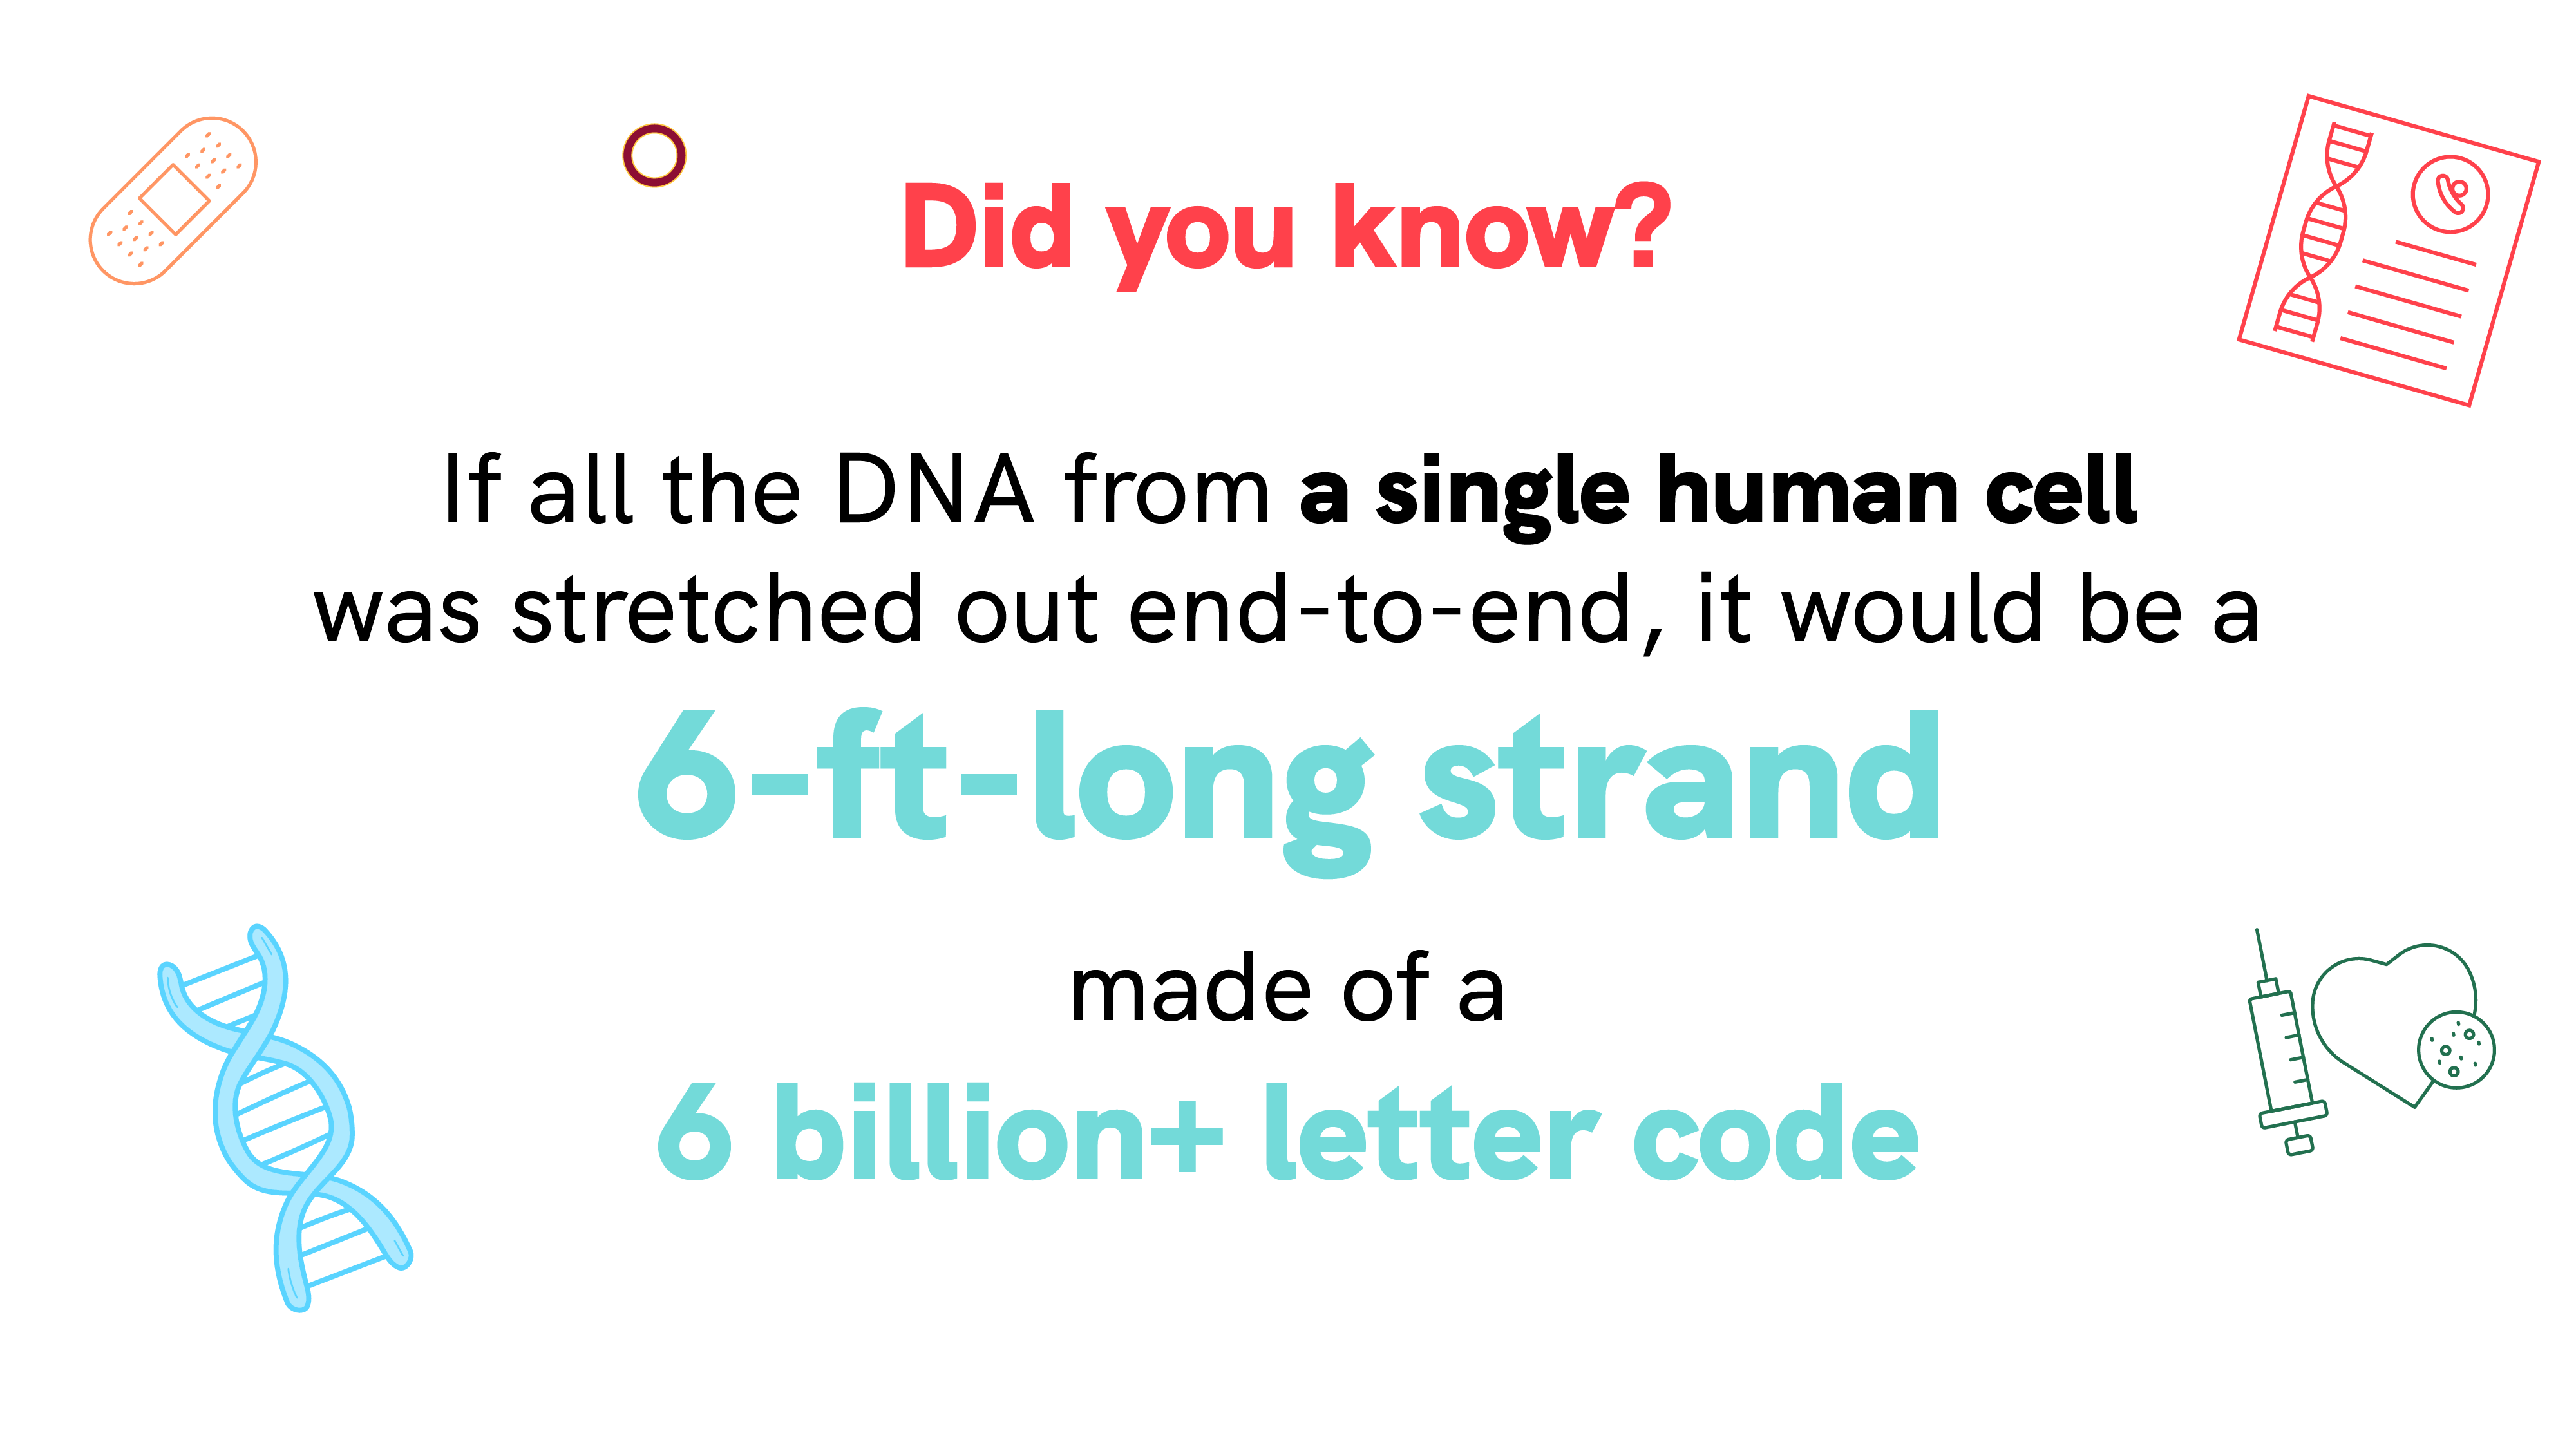 Did you know? If all the DNA from a single human cell was stretched out end to end, it would be a six foot long strand made of a more than 6 billion letter code